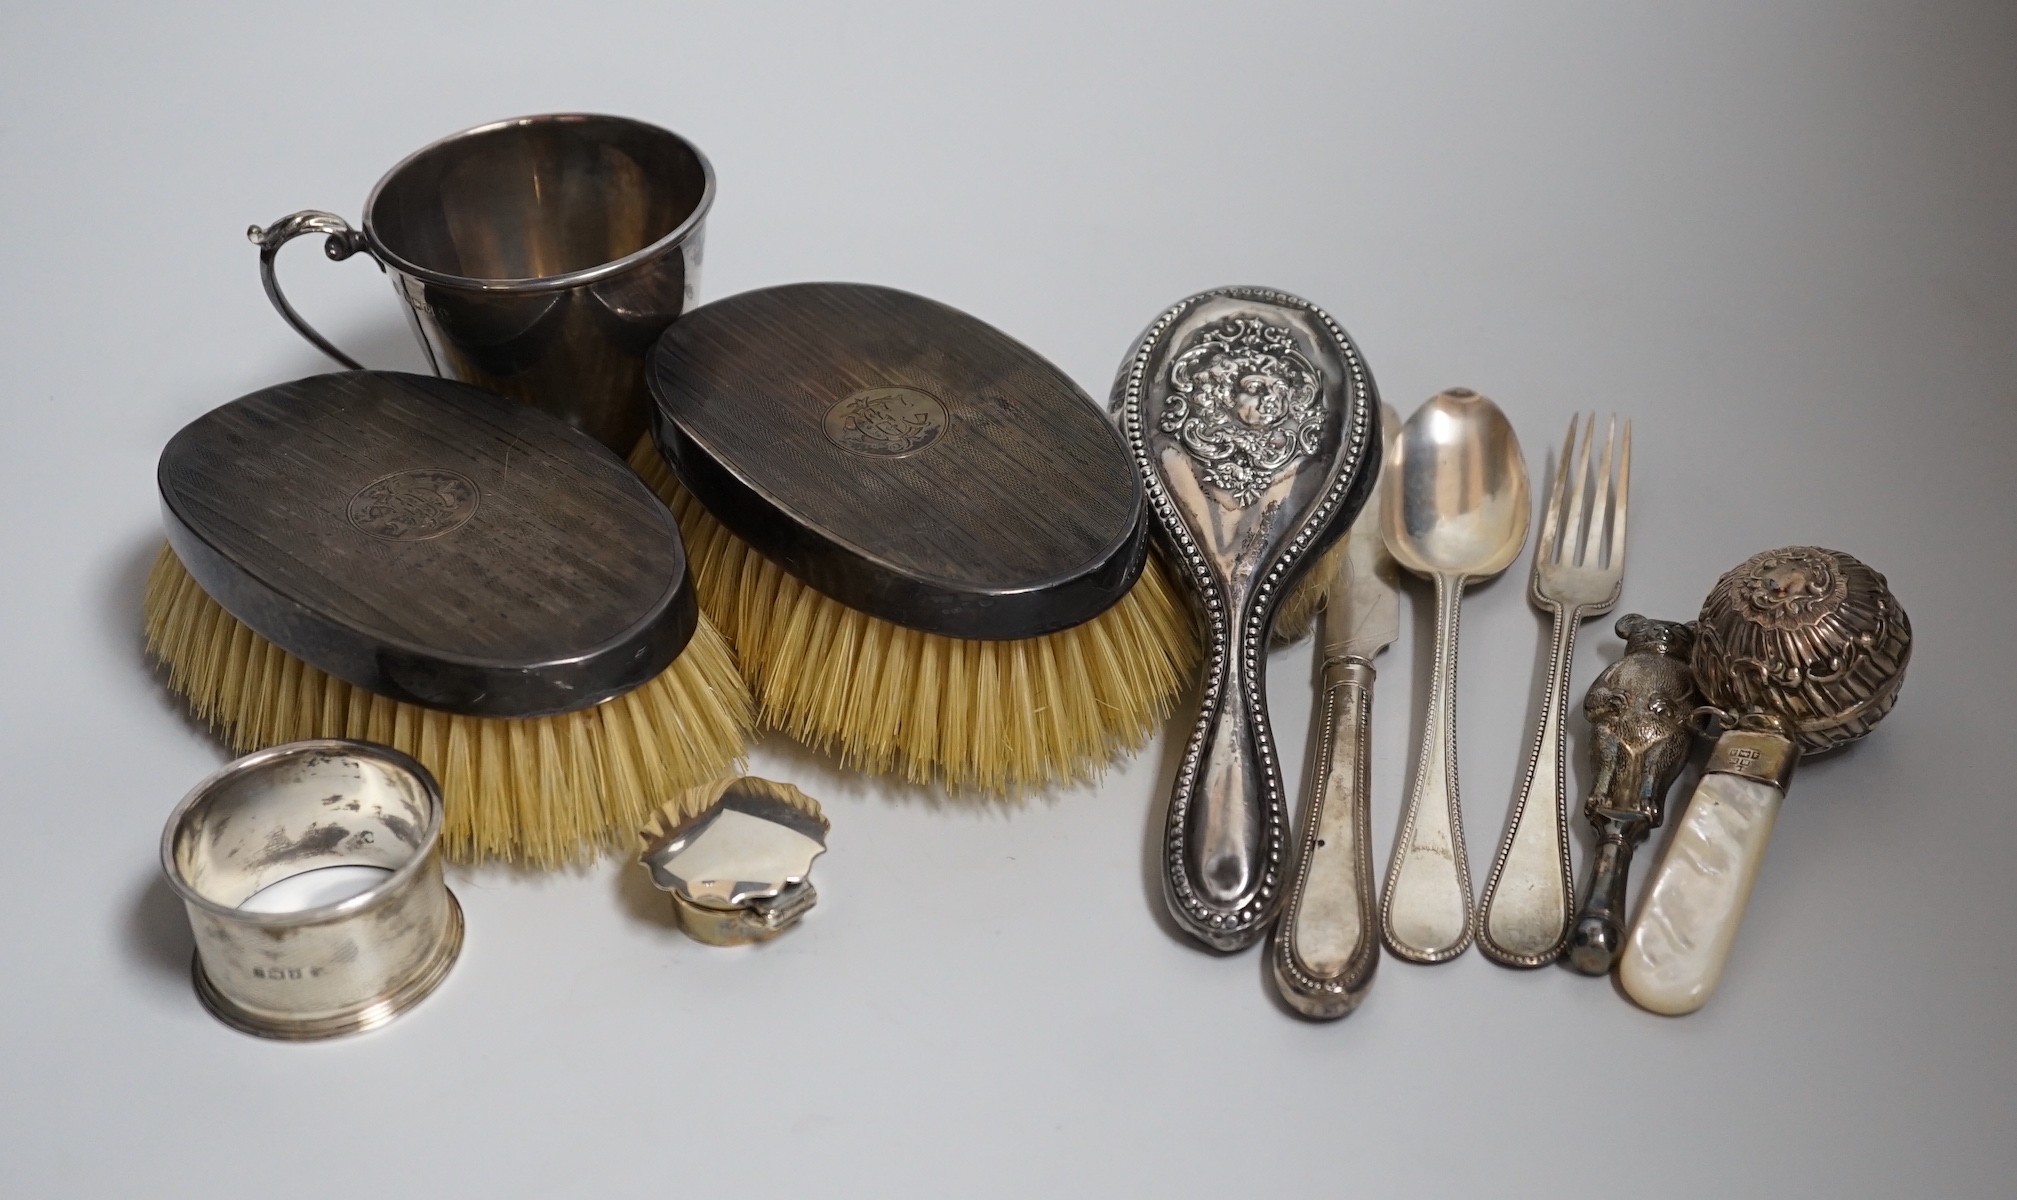 A mixed group of silverware including a pair of silver mounted clothes brushes, two rattles, a napkin ring, a christening trio and mug.